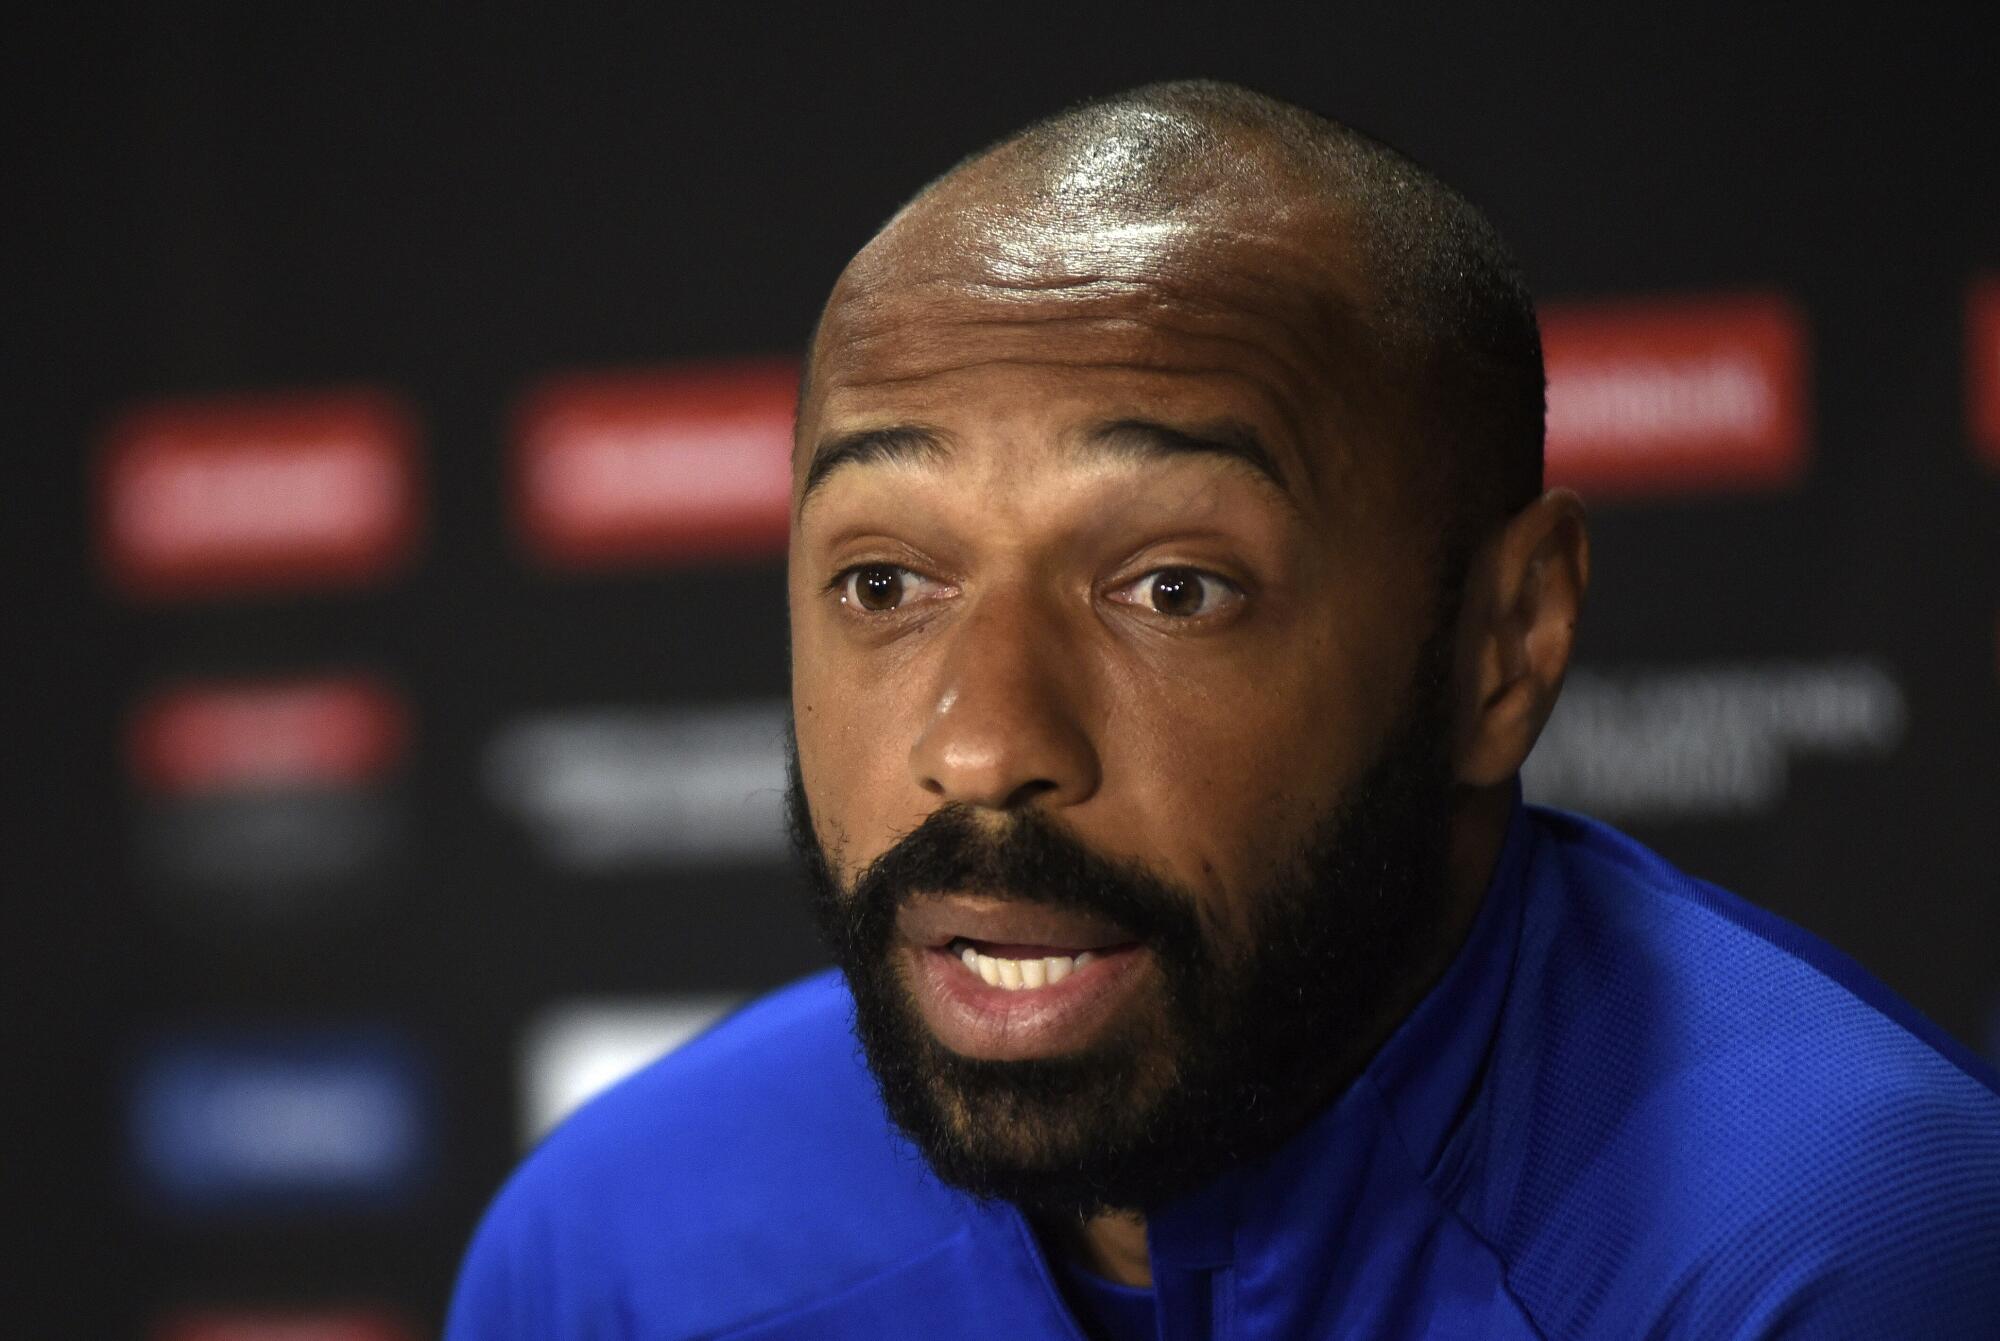 Thierry Henry speaks during a 2020 press conference